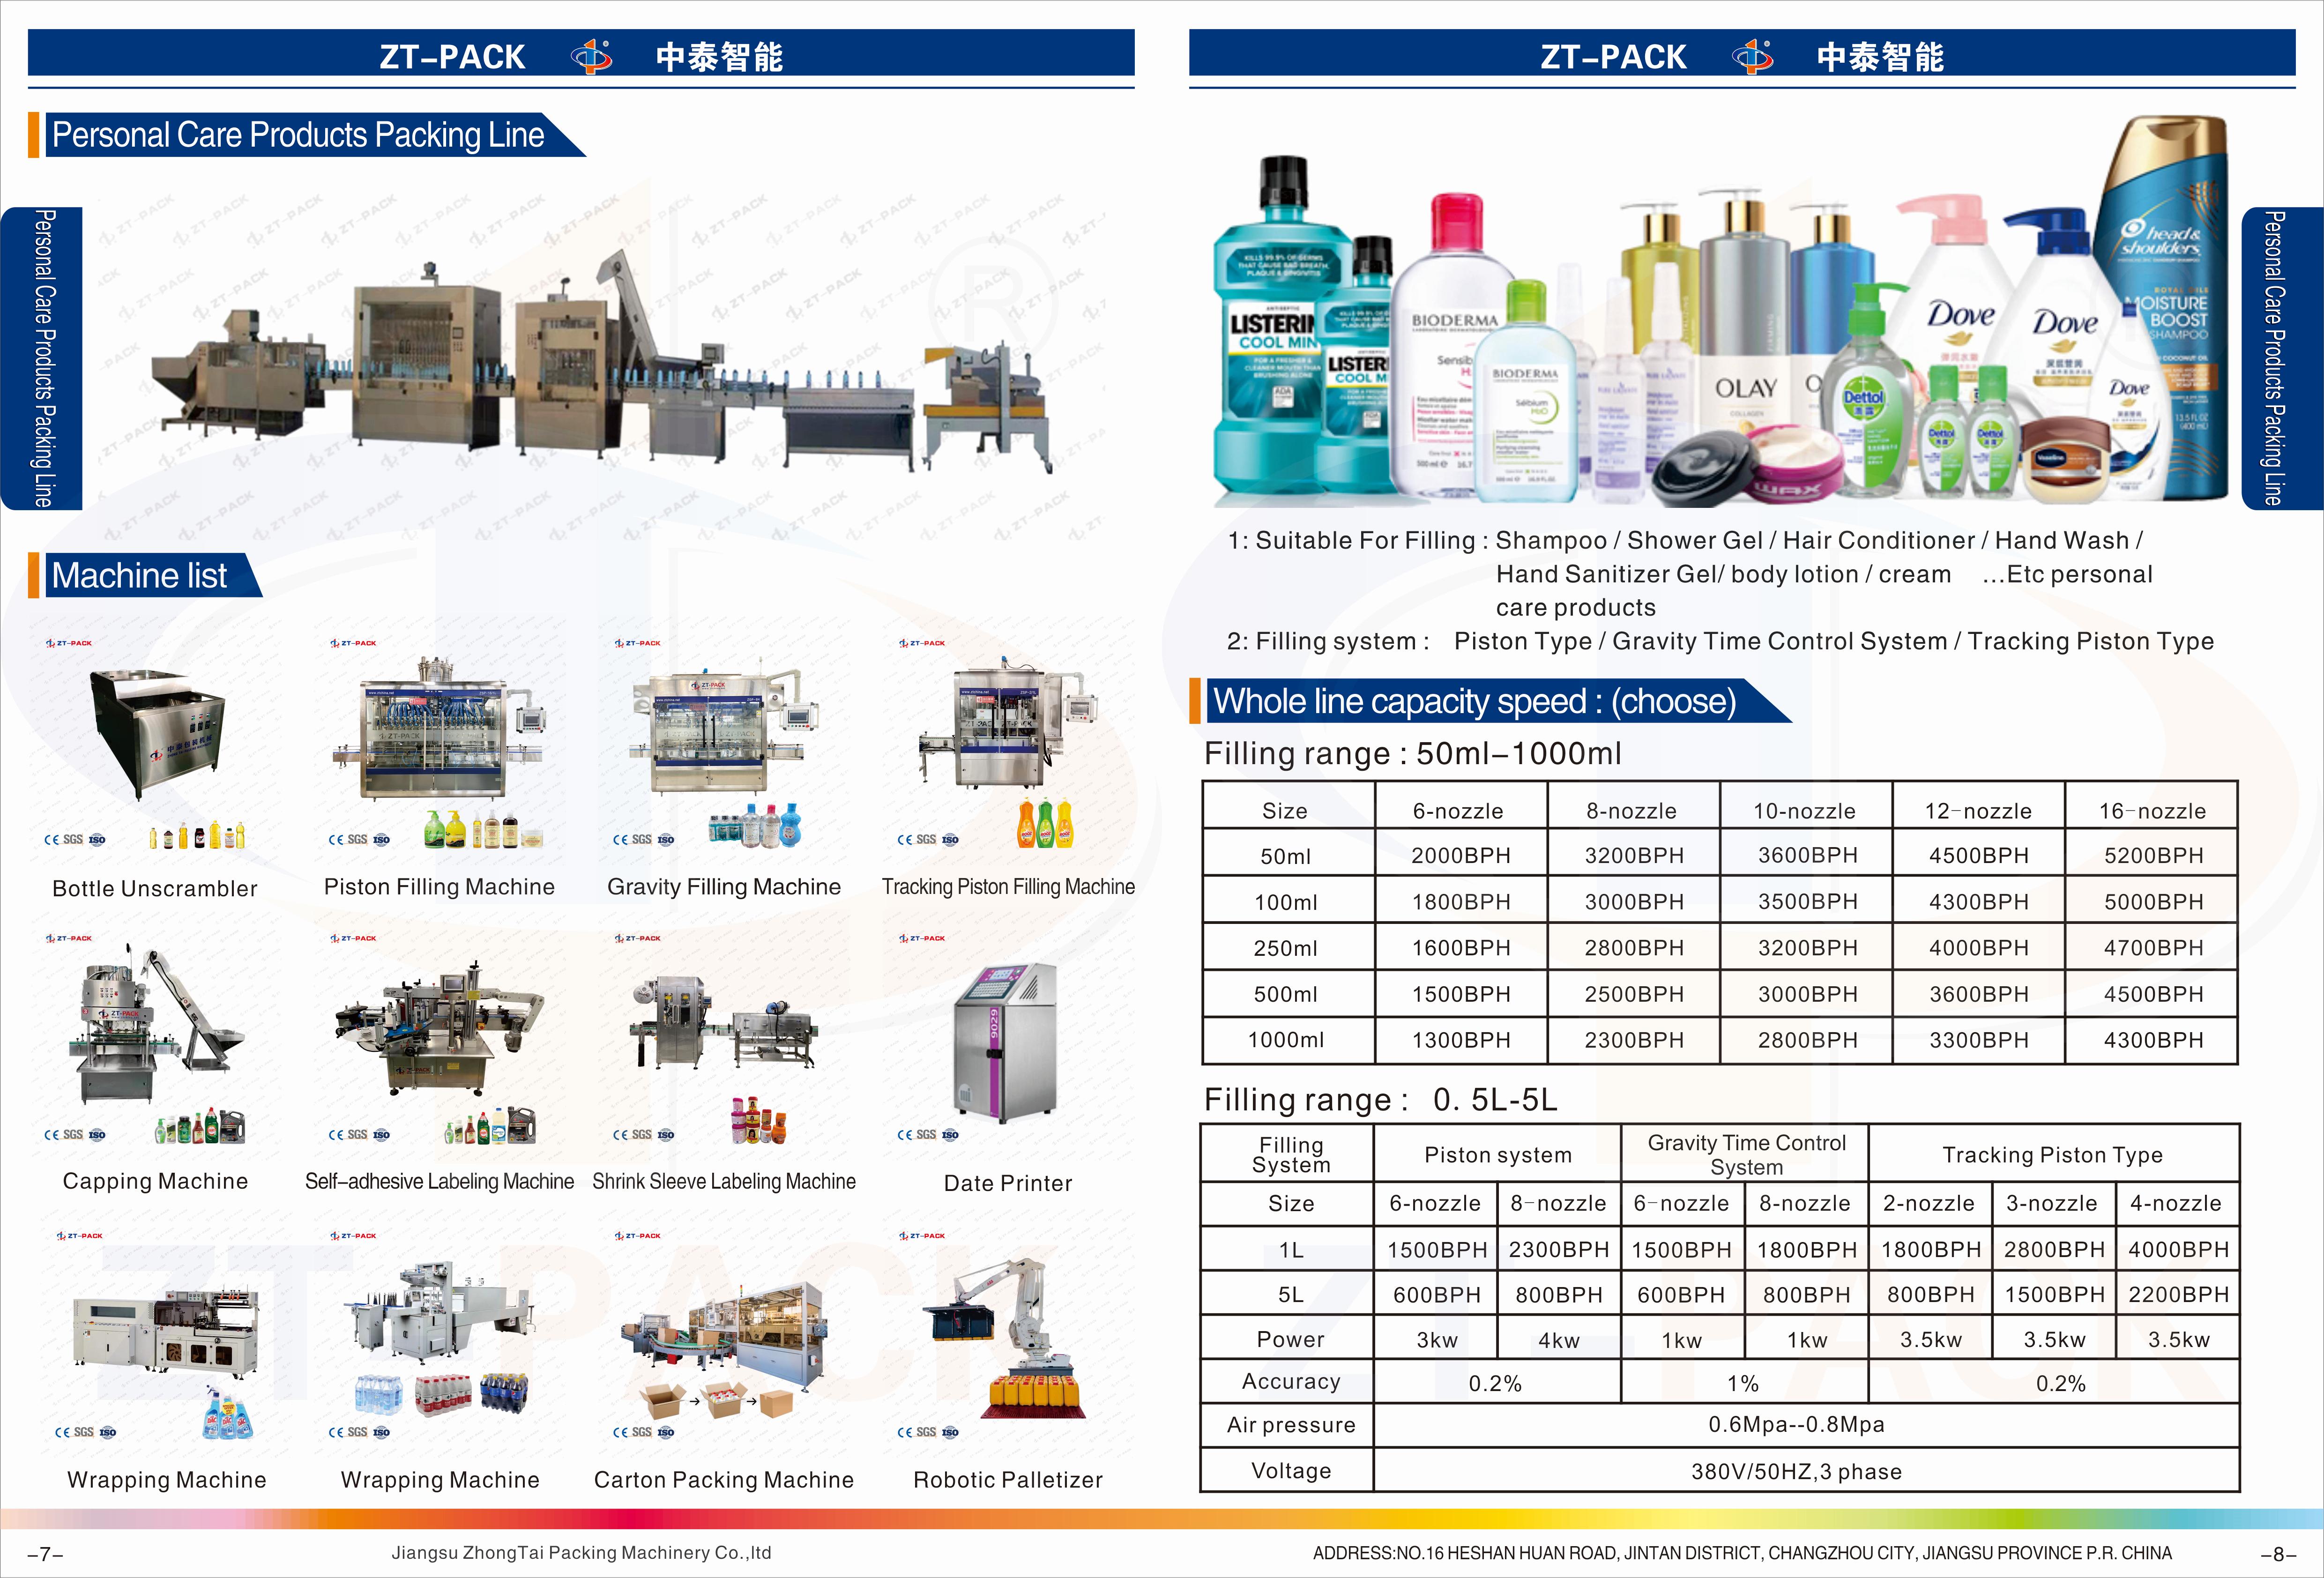 Personal Care Packing Line